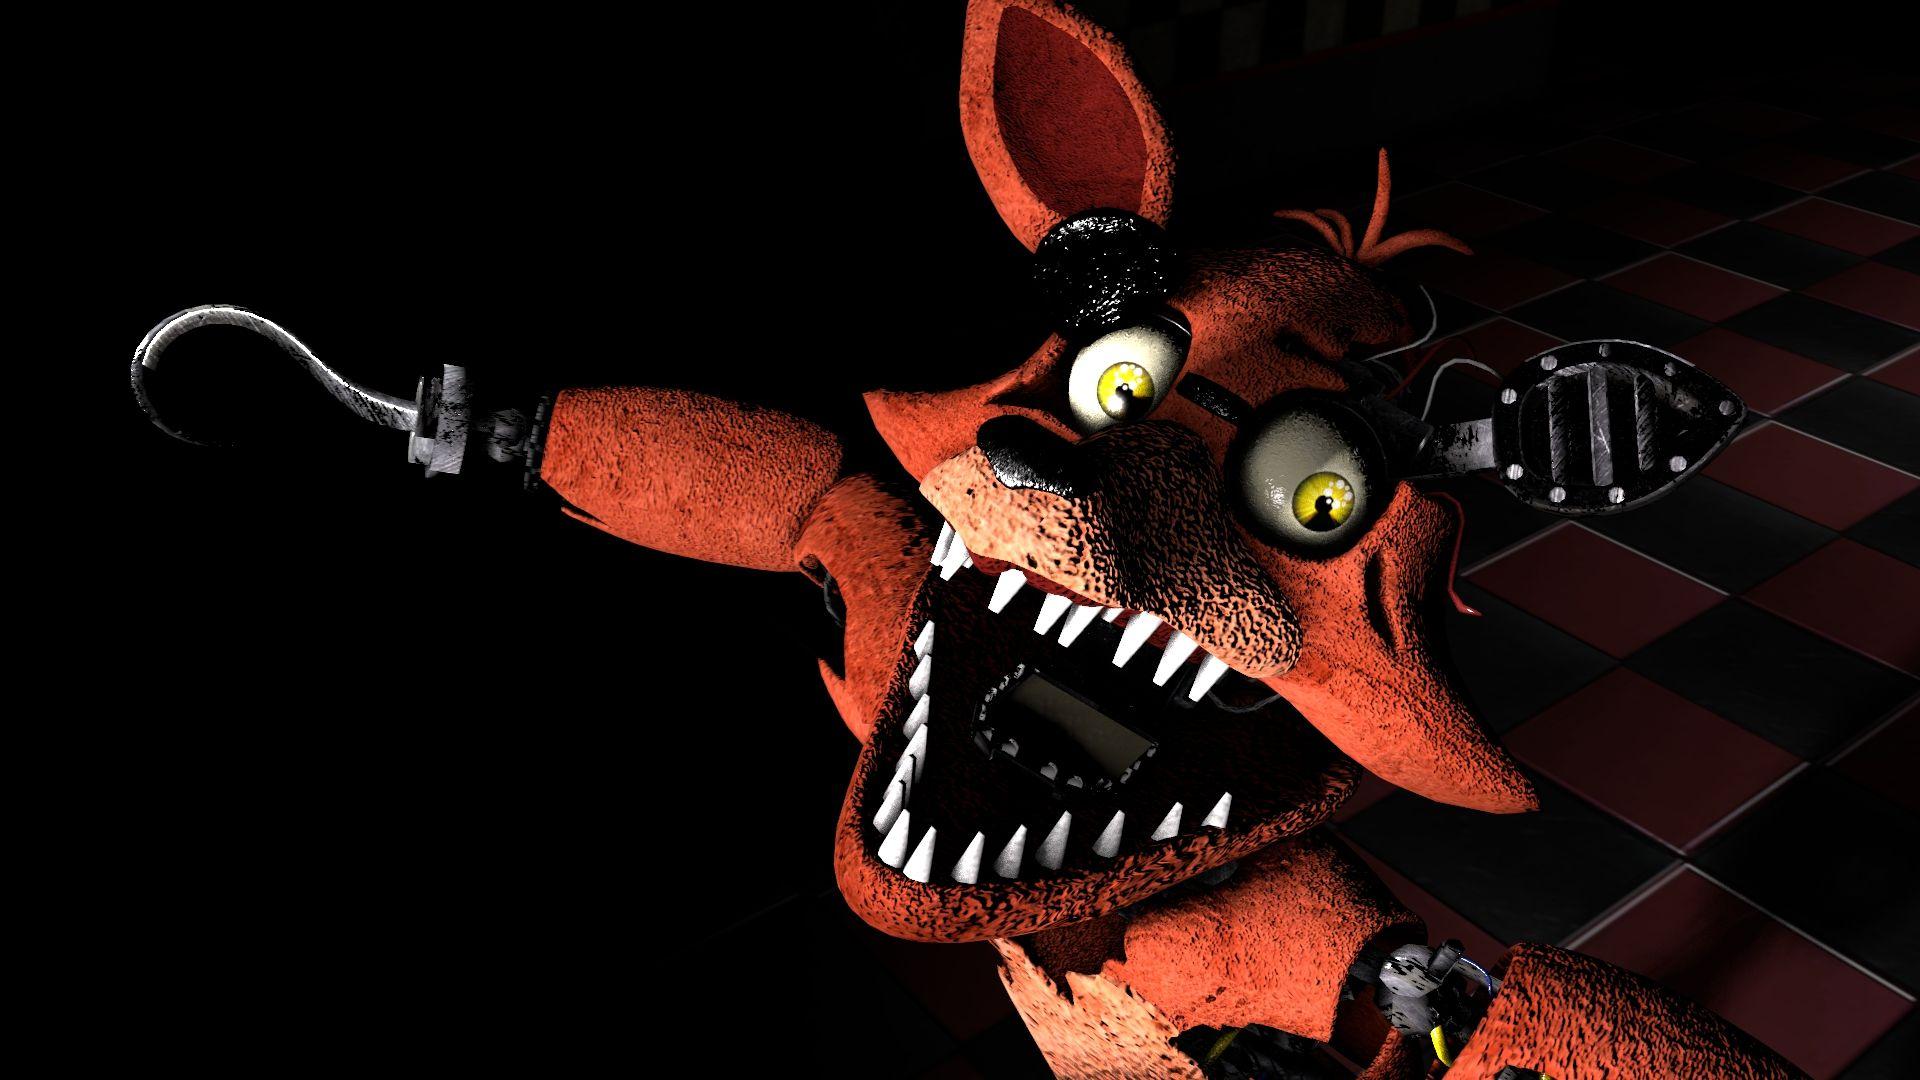 Фон фокси. Withered Foxy. Фокси ФНАФ 1. Фокси 2. FNAF 2 Фокси.